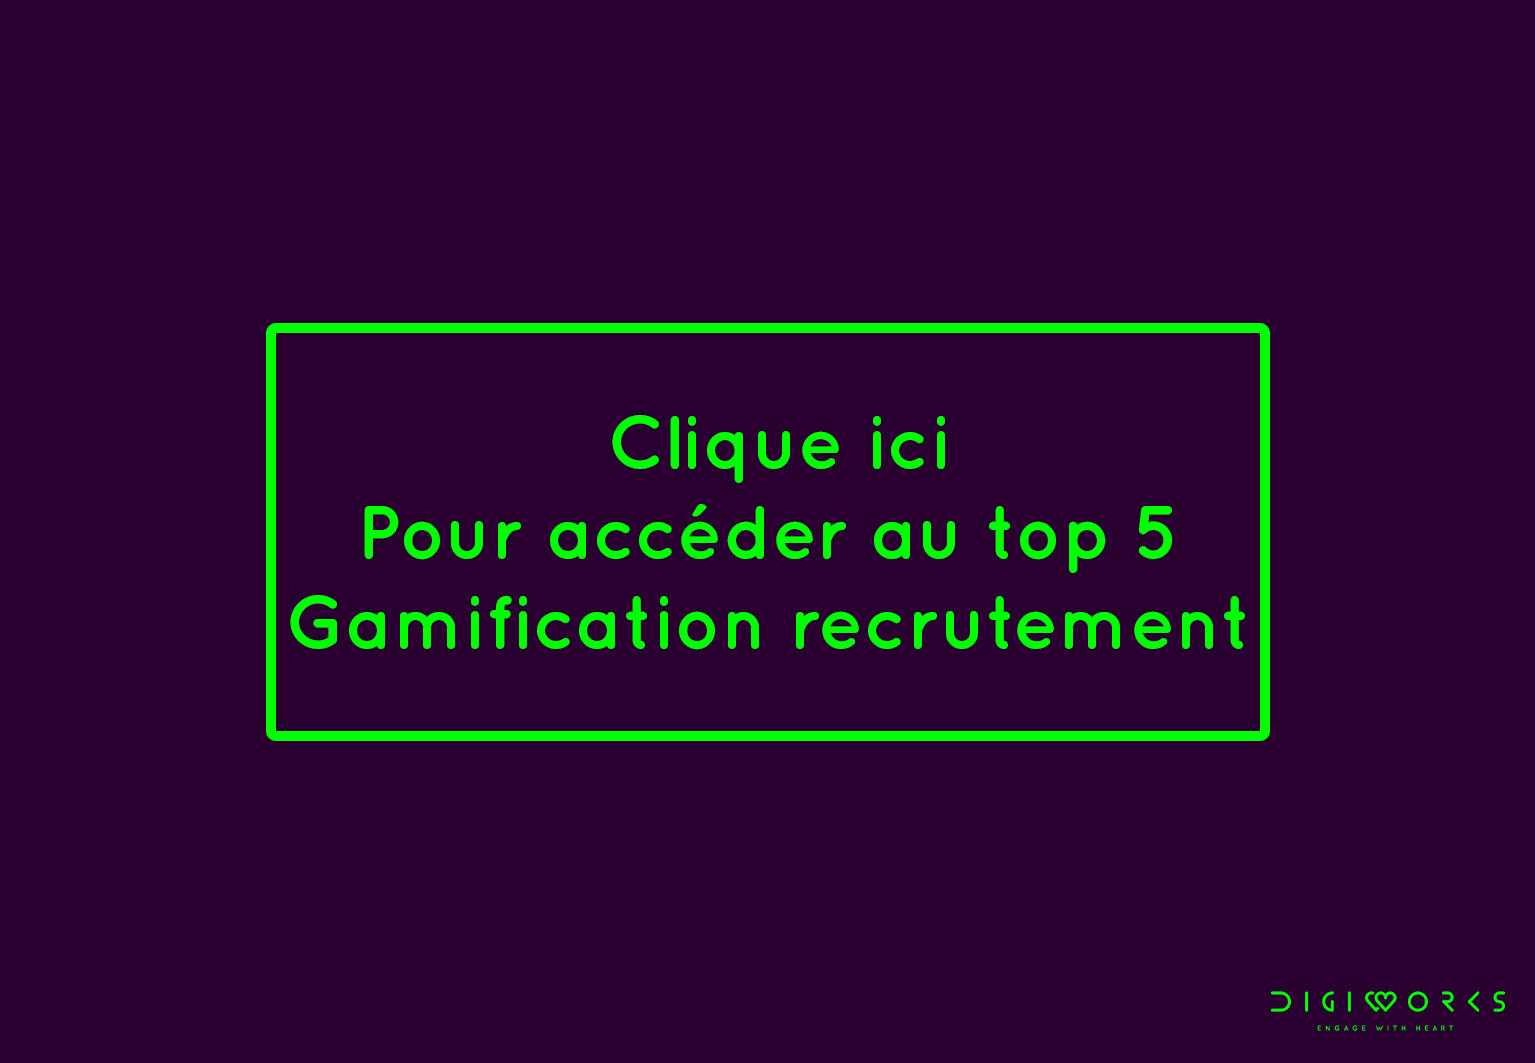 gamification recrutement top 5